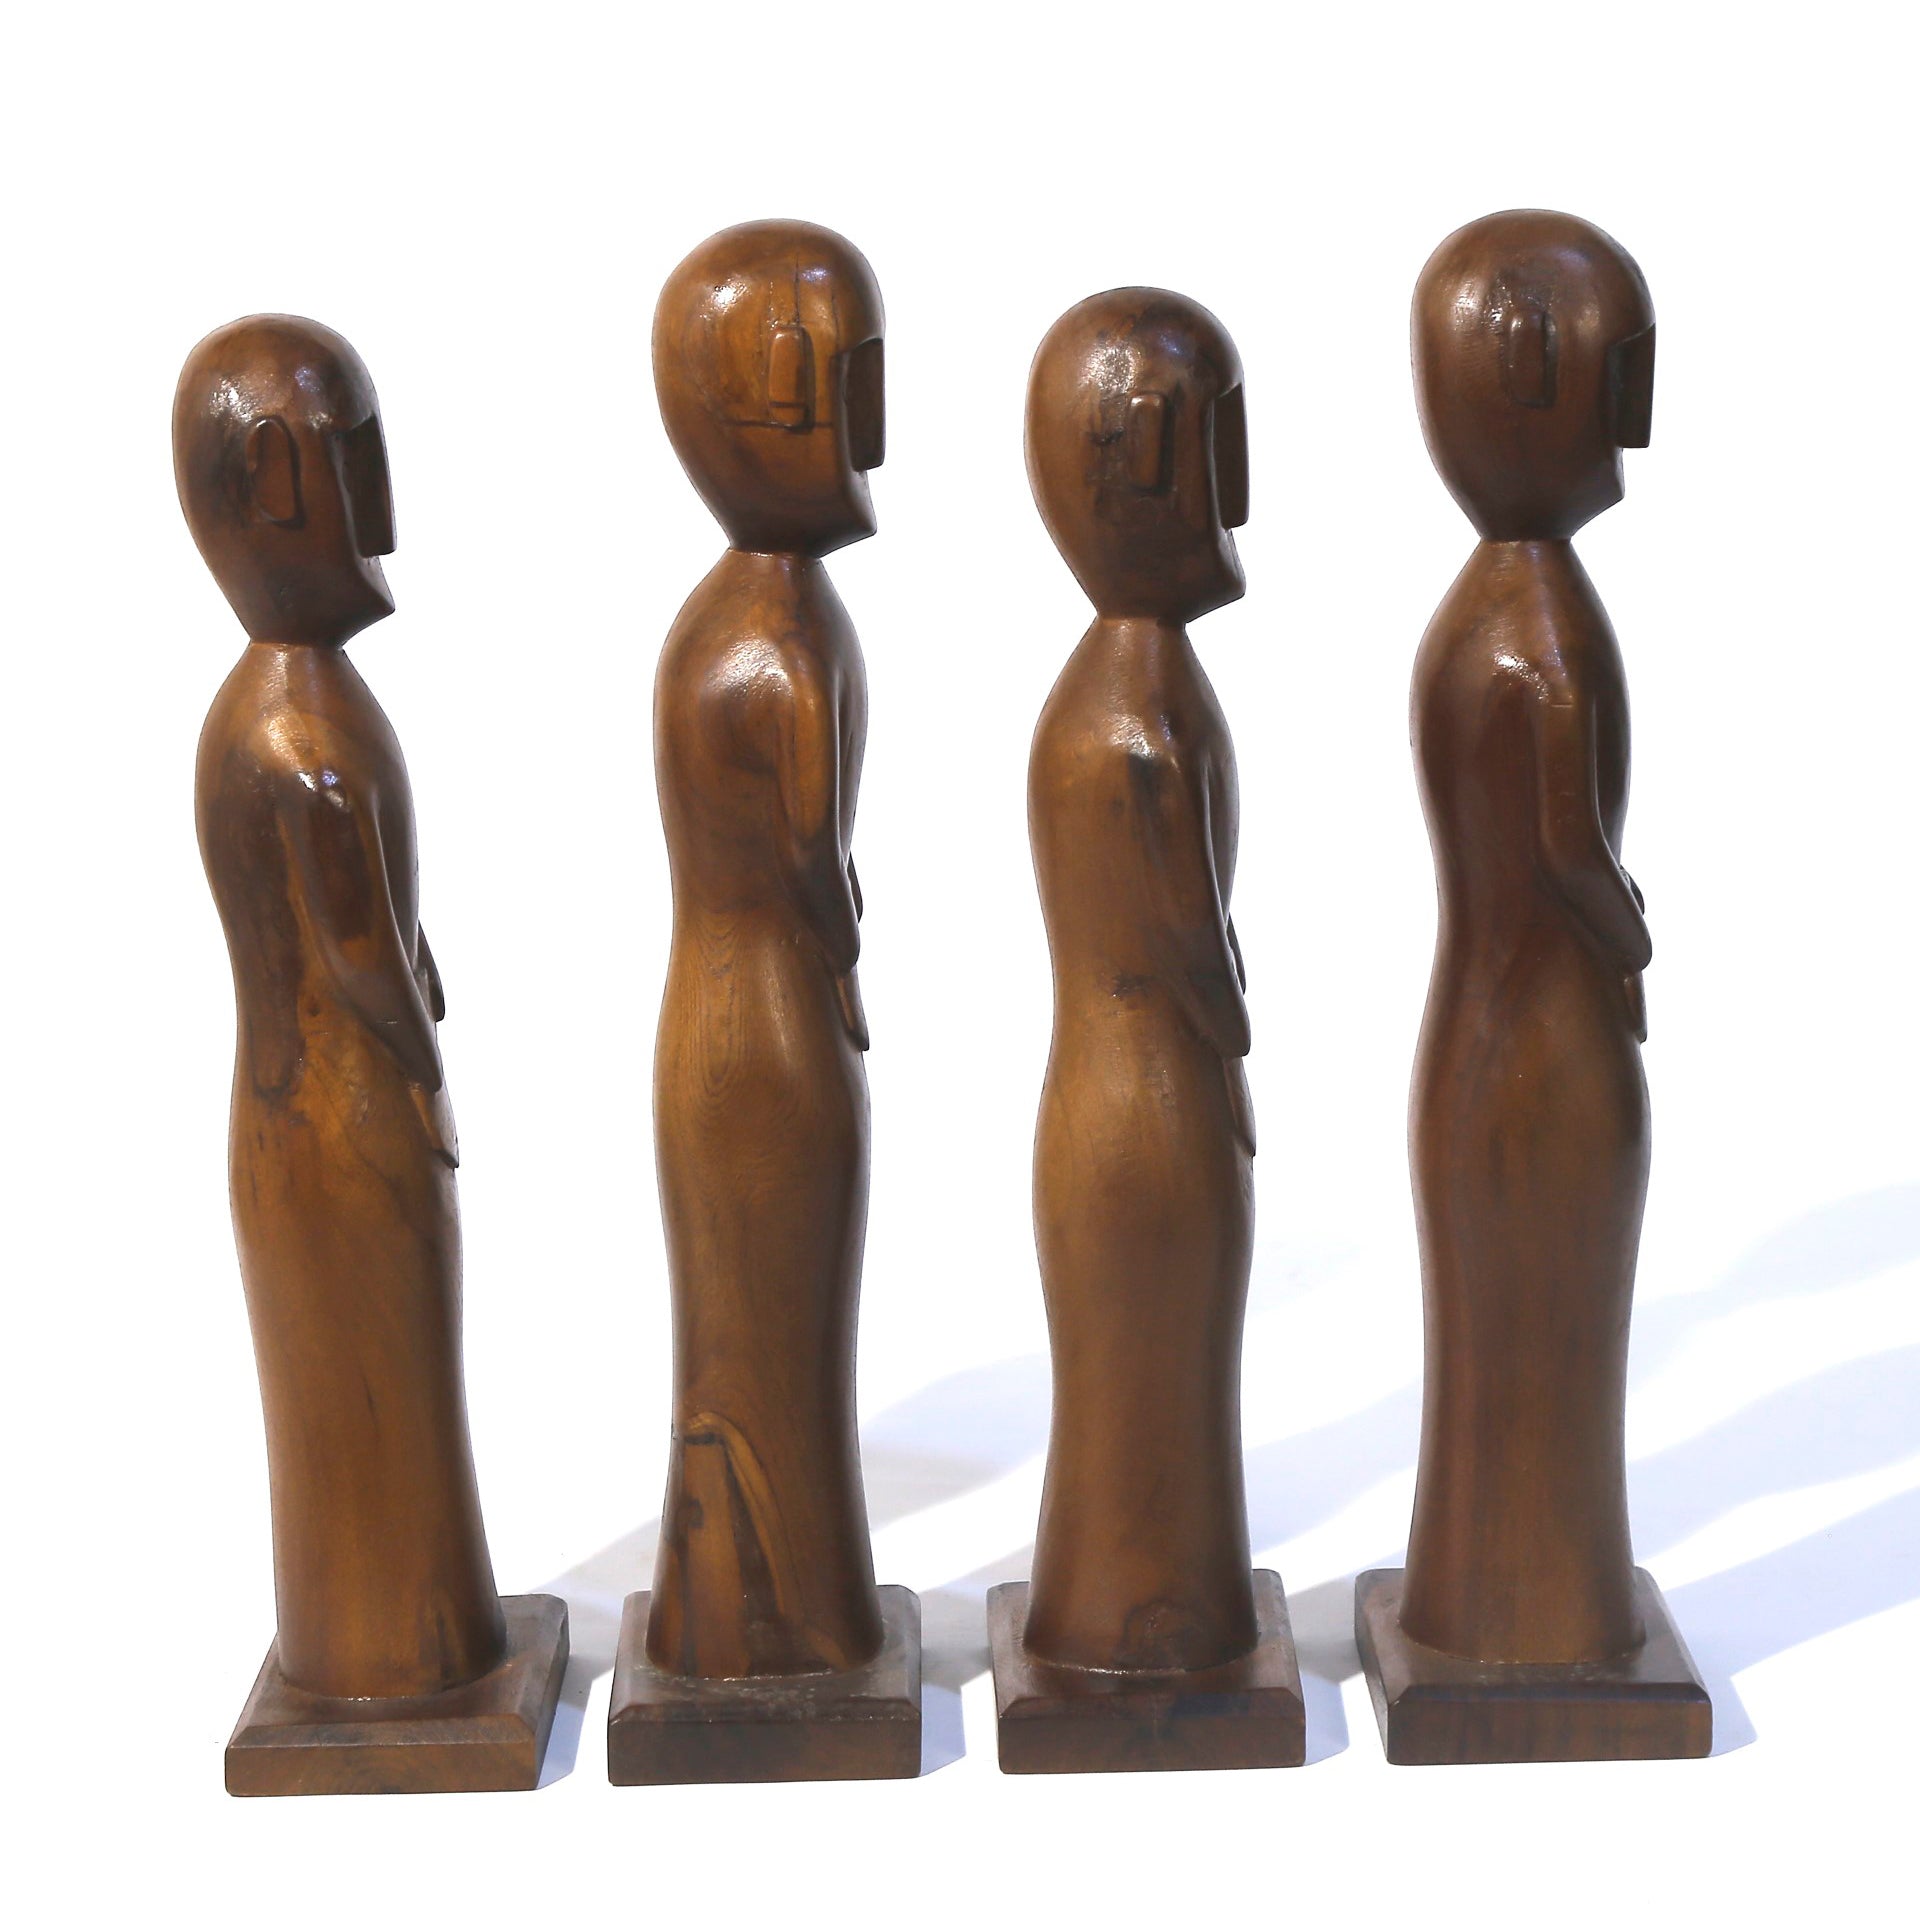 (Set of 4) Artistic Wooden Figurine Traditional Décor